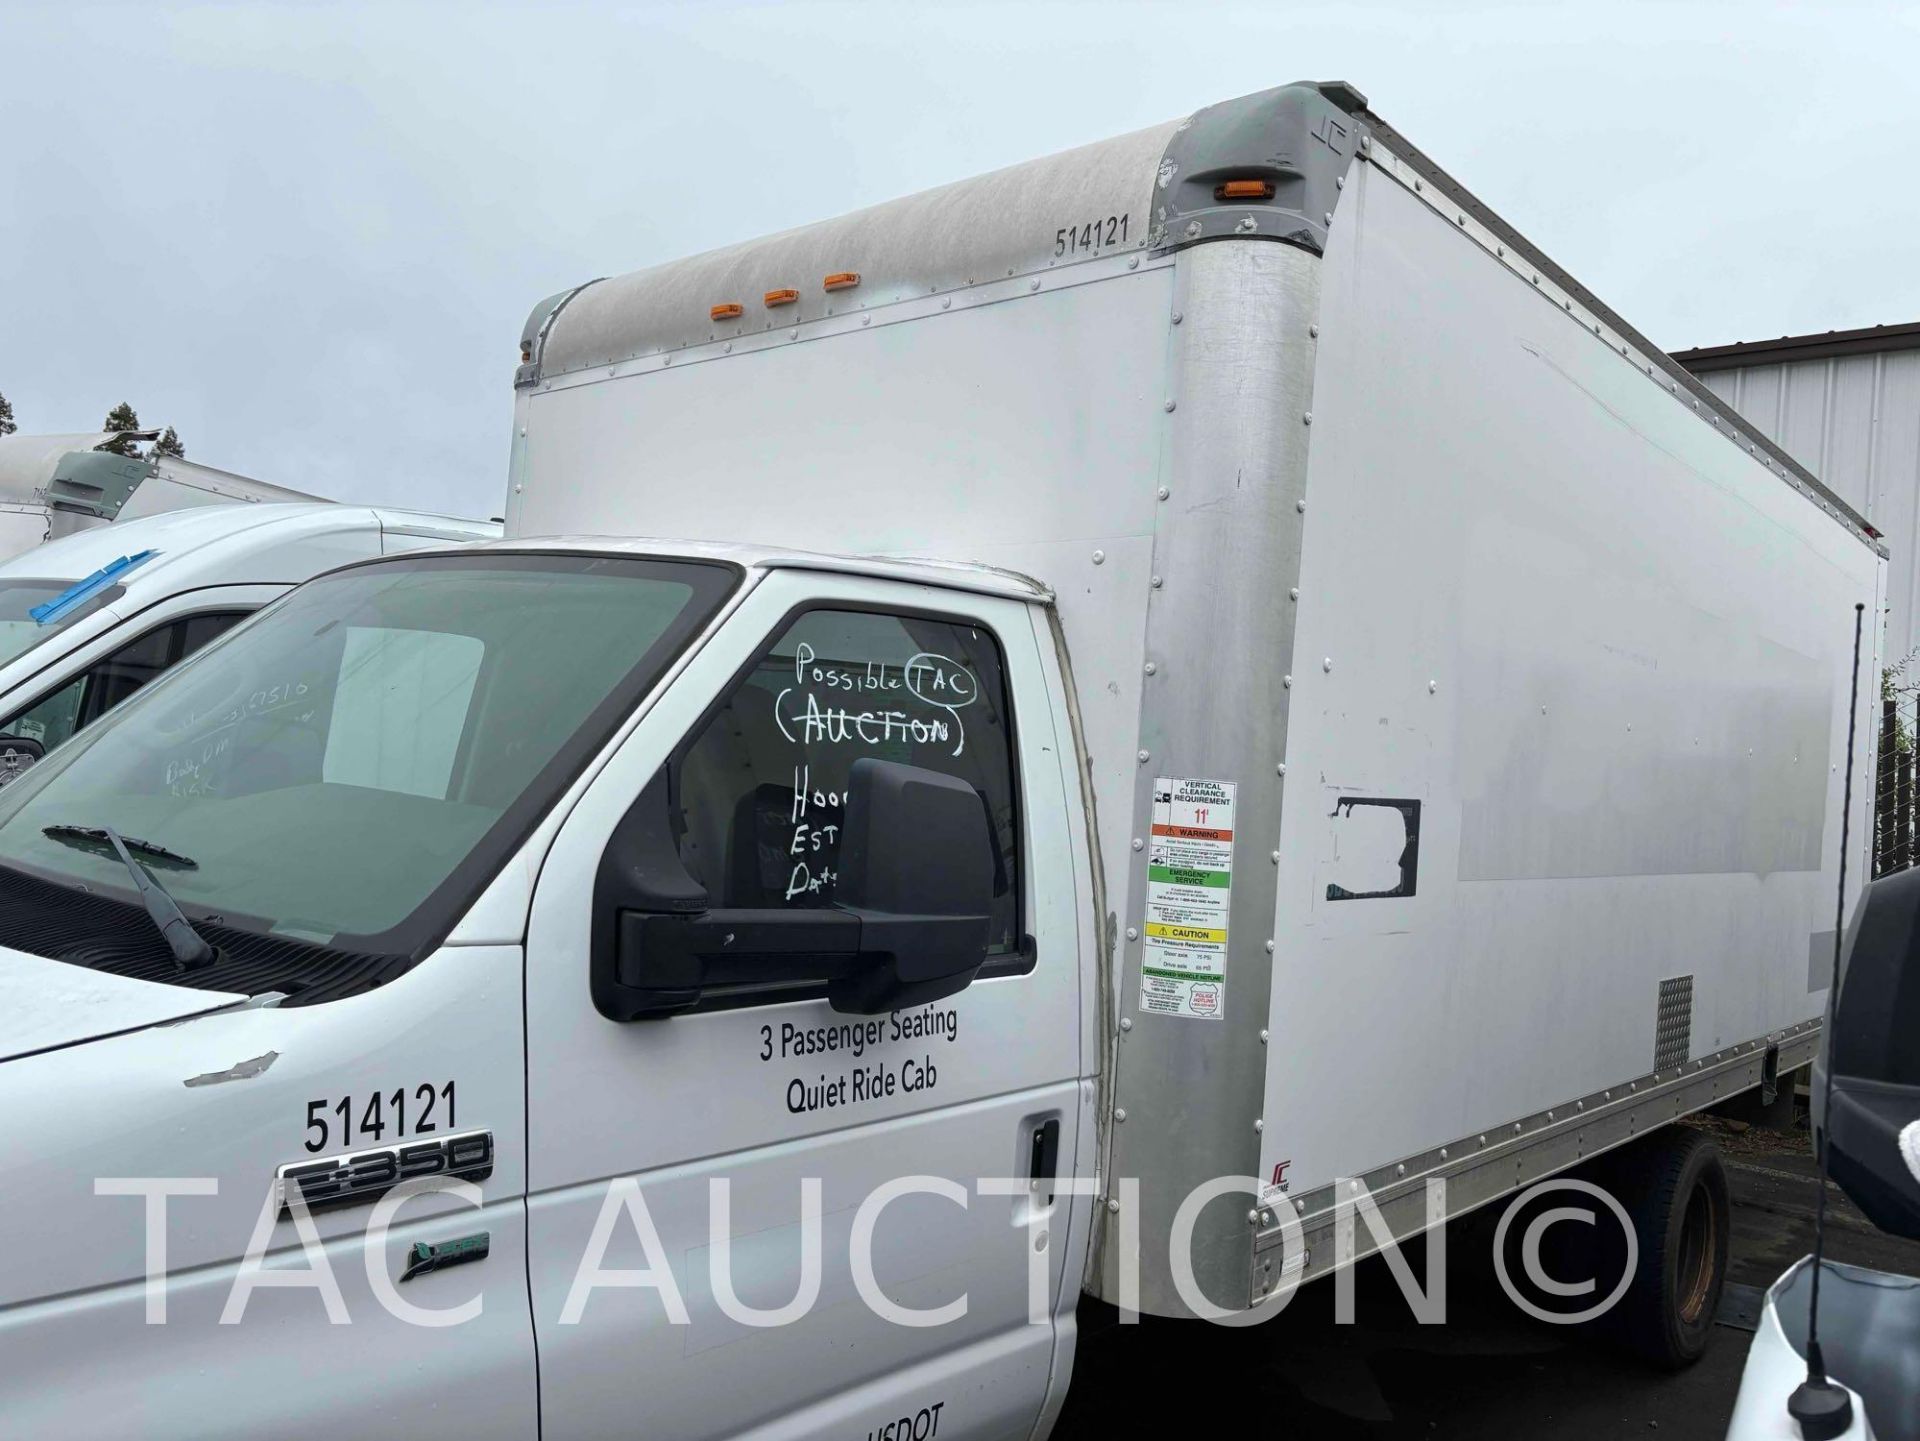 2015 Ford E-350 16ft Box Truck - Image 66 of 98